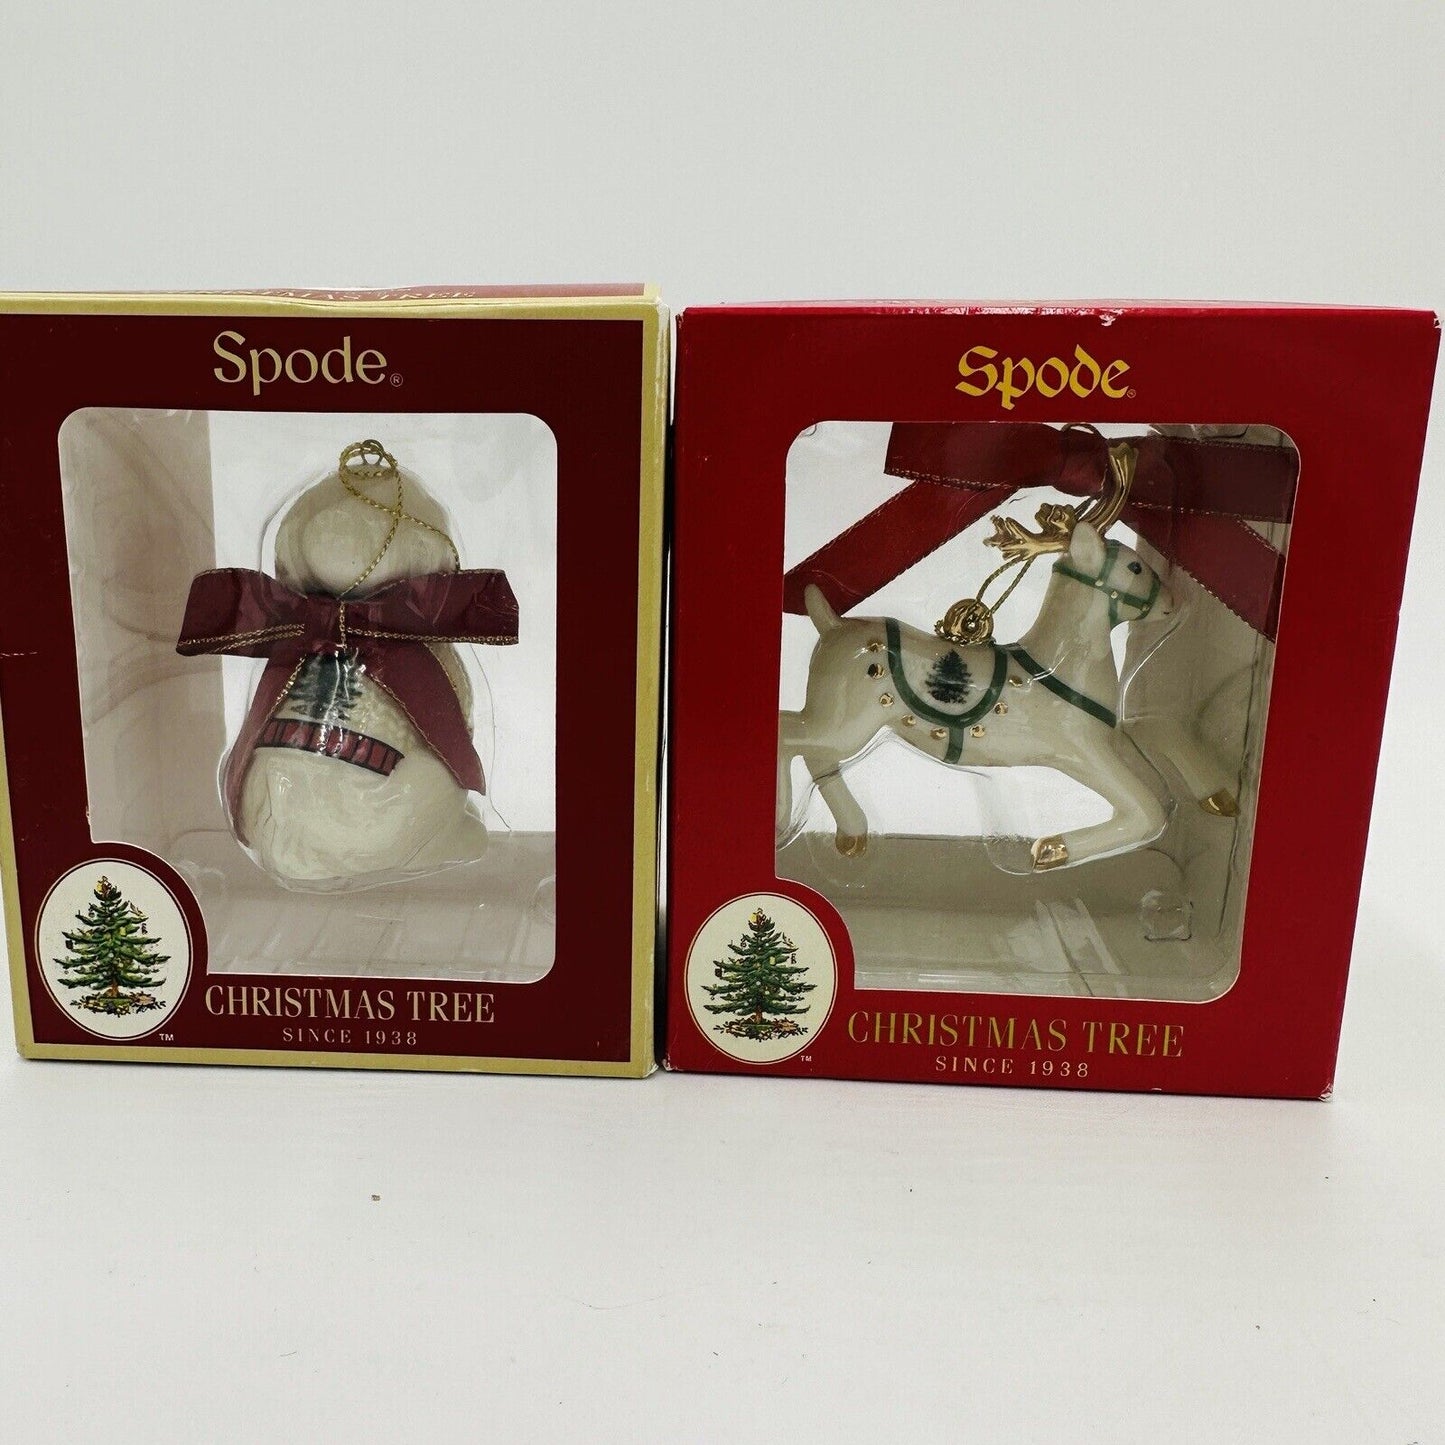 Spode Christmas Tree Ornaments Dog and Deer Figurines Set 2 Pieces Holiday